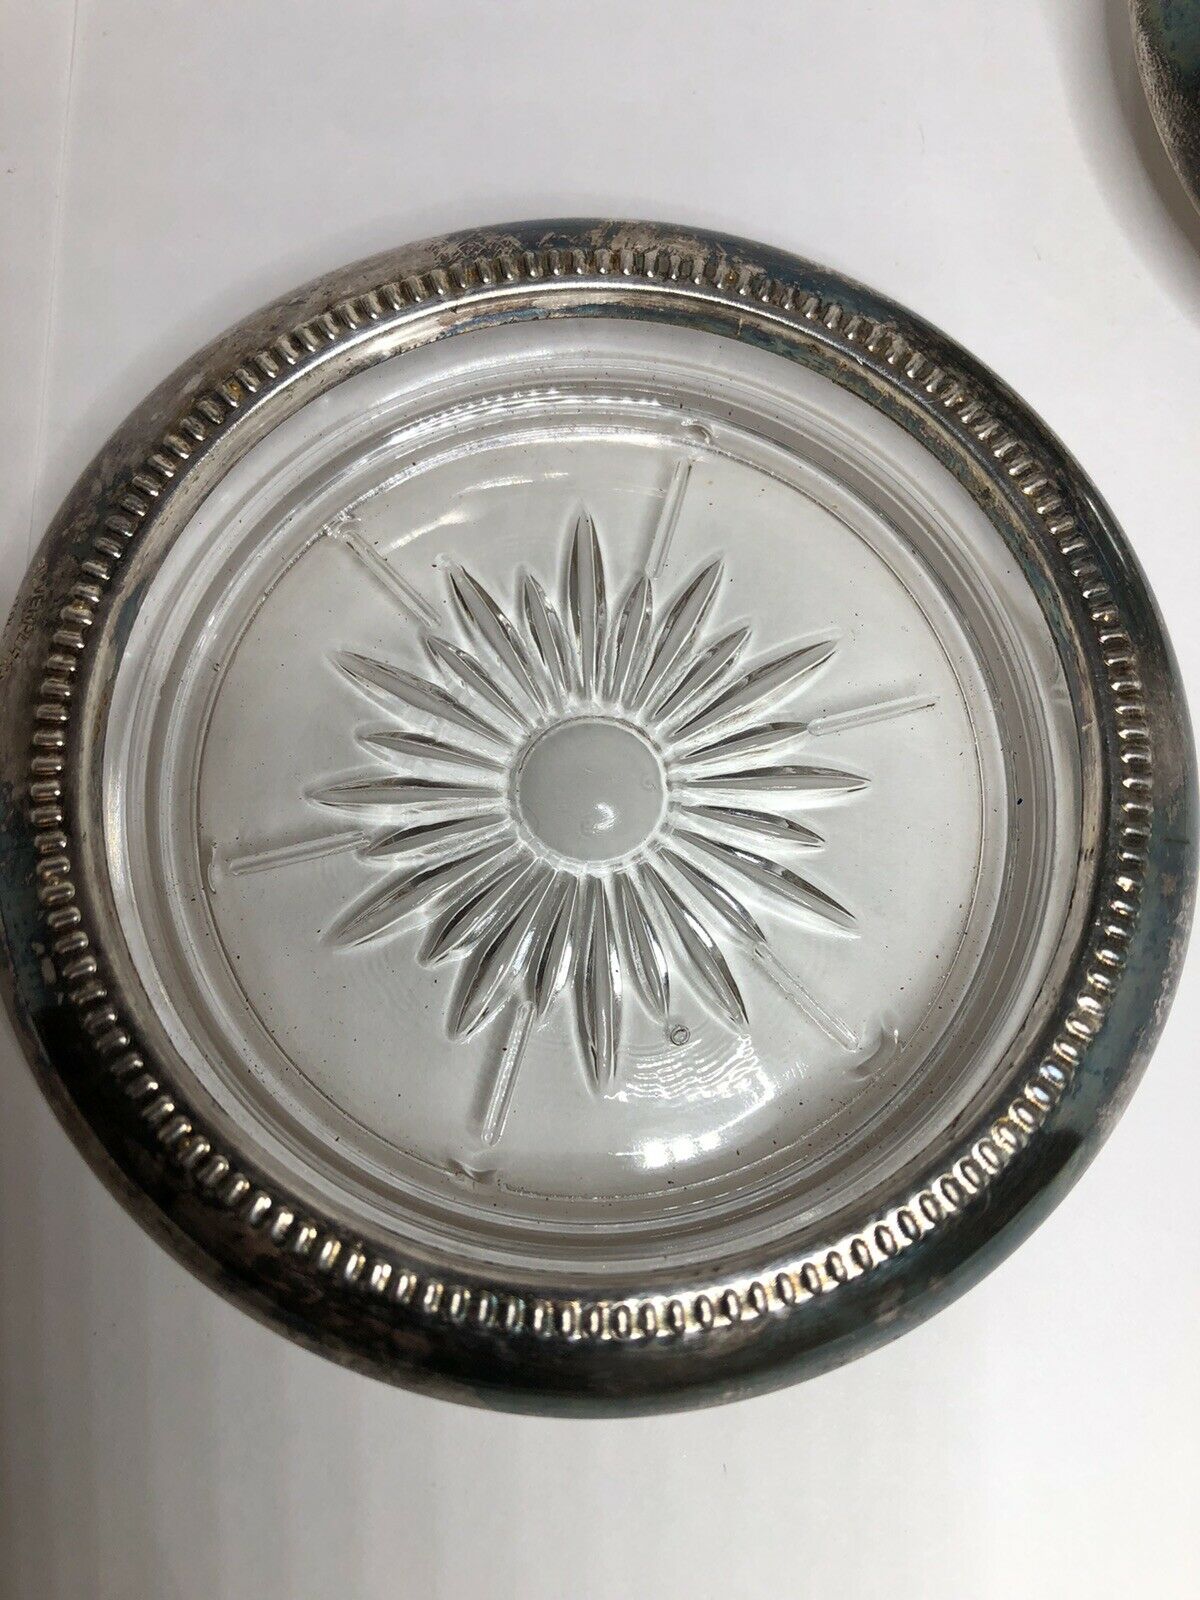 Vintage Leonard Italy Silver And Glass Coasters With Star/ Sun Cutouts Set Of 4